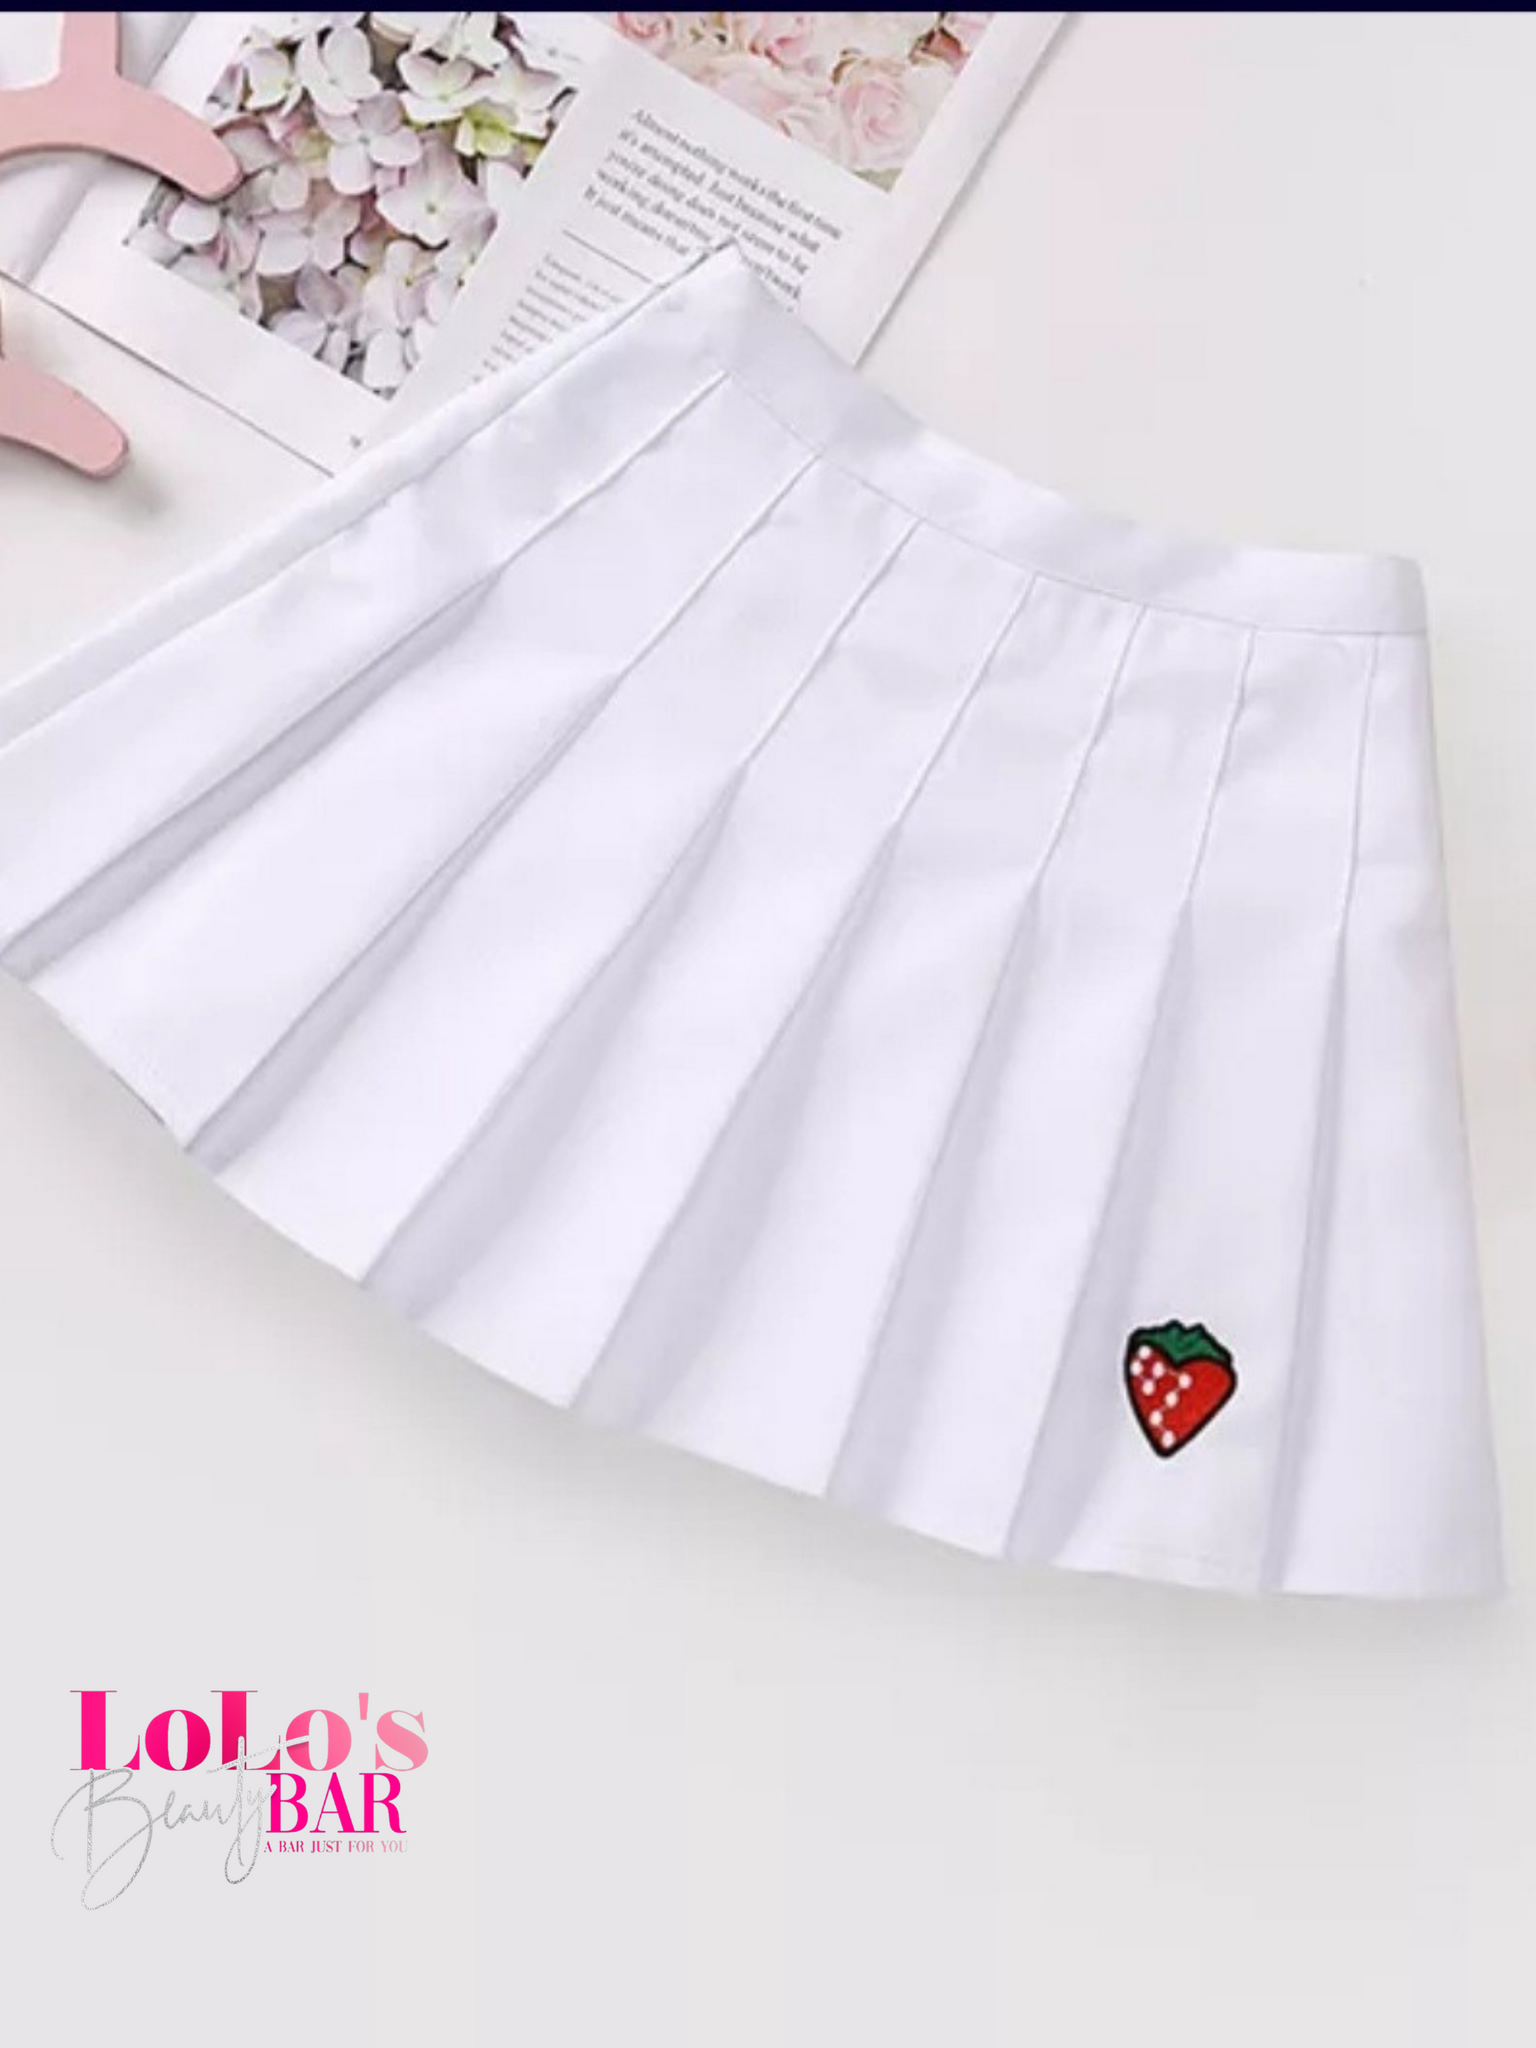 Strawberry Pleated Skirts